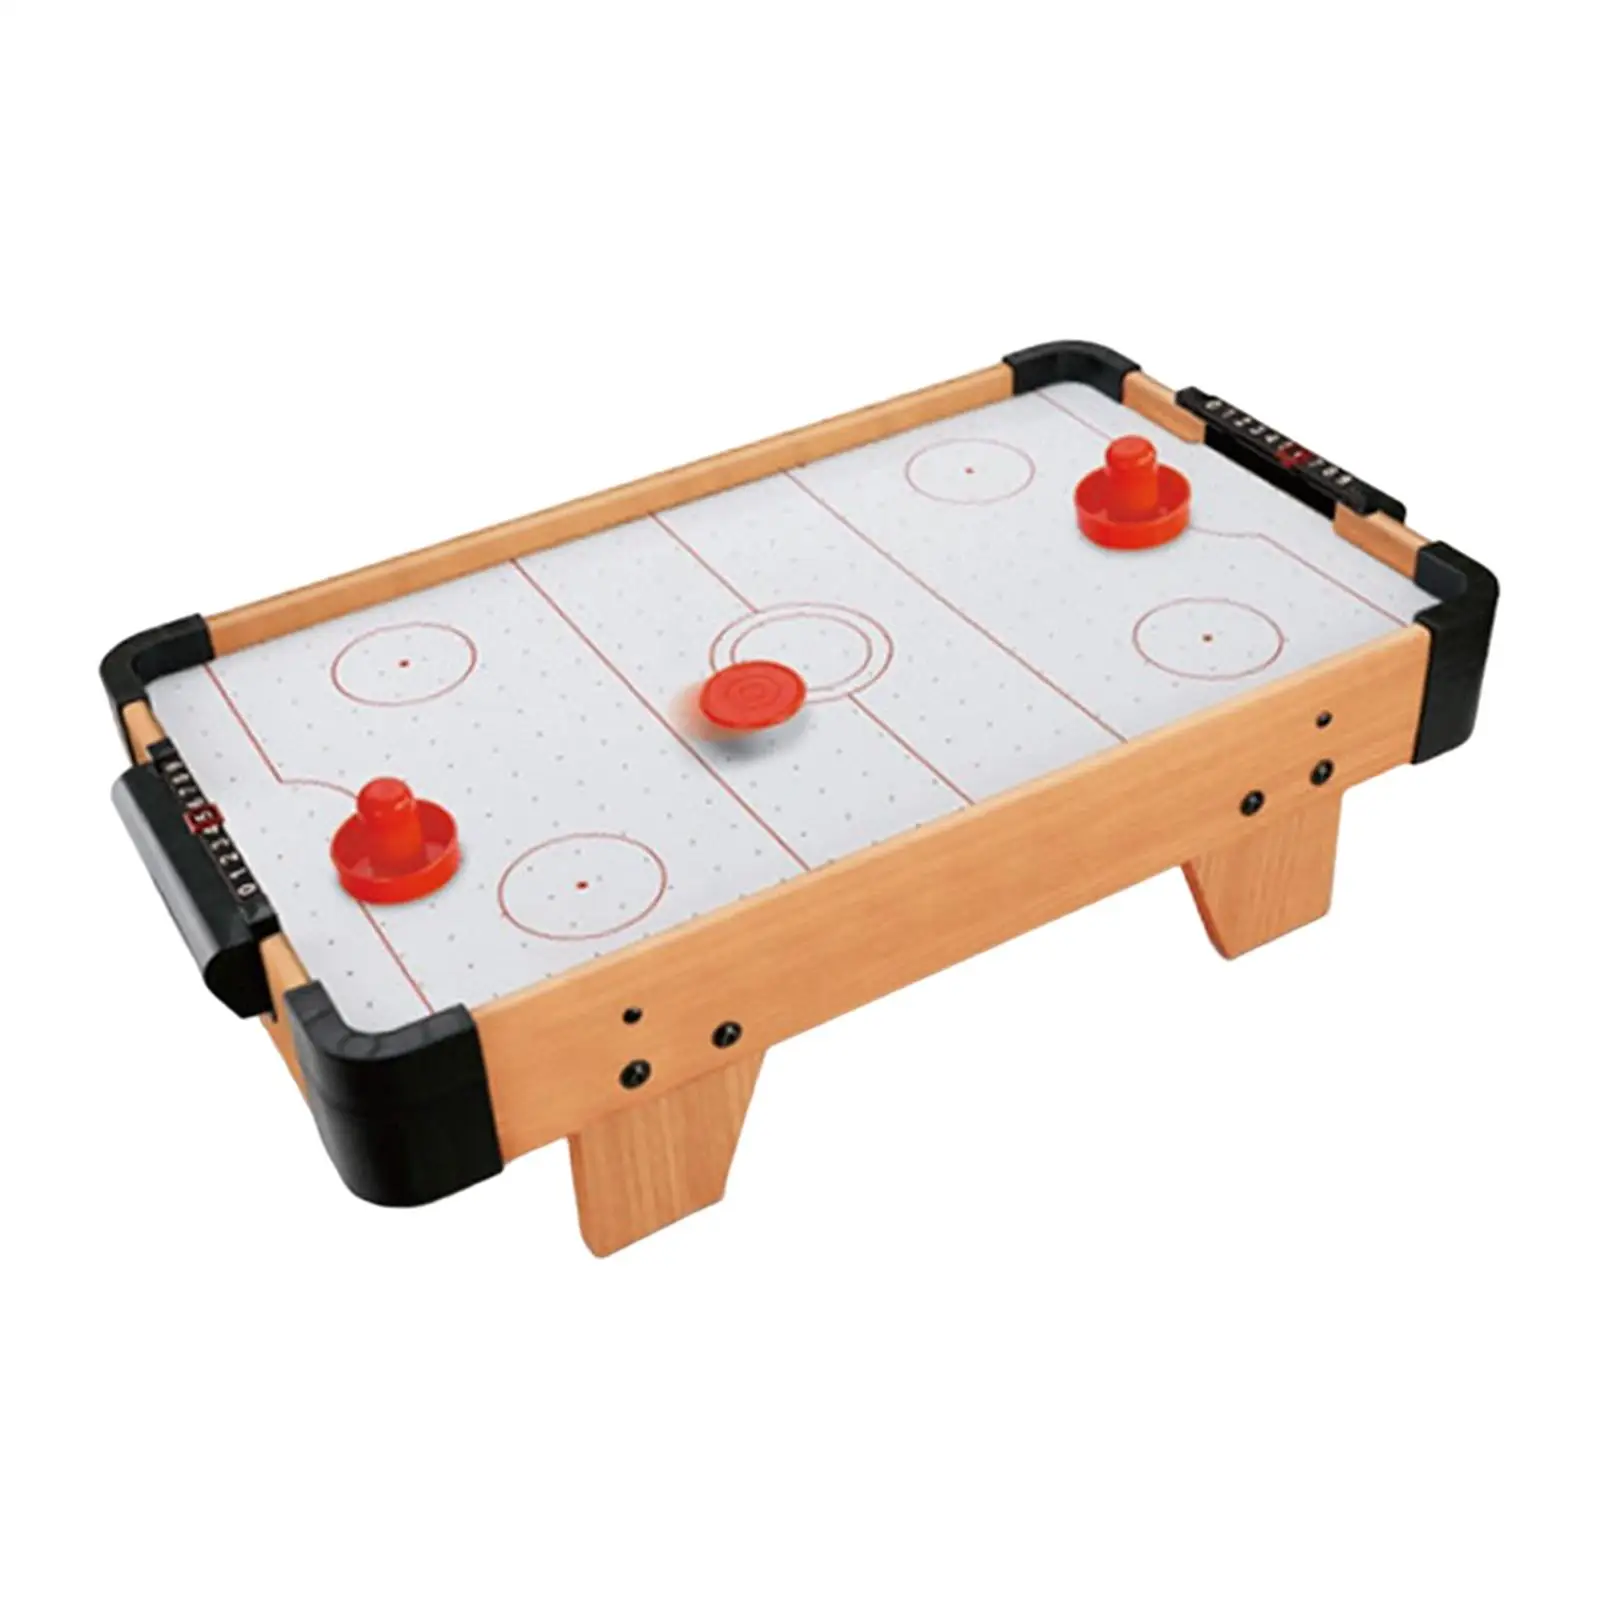 Mini Air Hockey Board Game with Sliders and Pucks Party Desktop Playing Field Family Game for Girls Boys Adults Kids